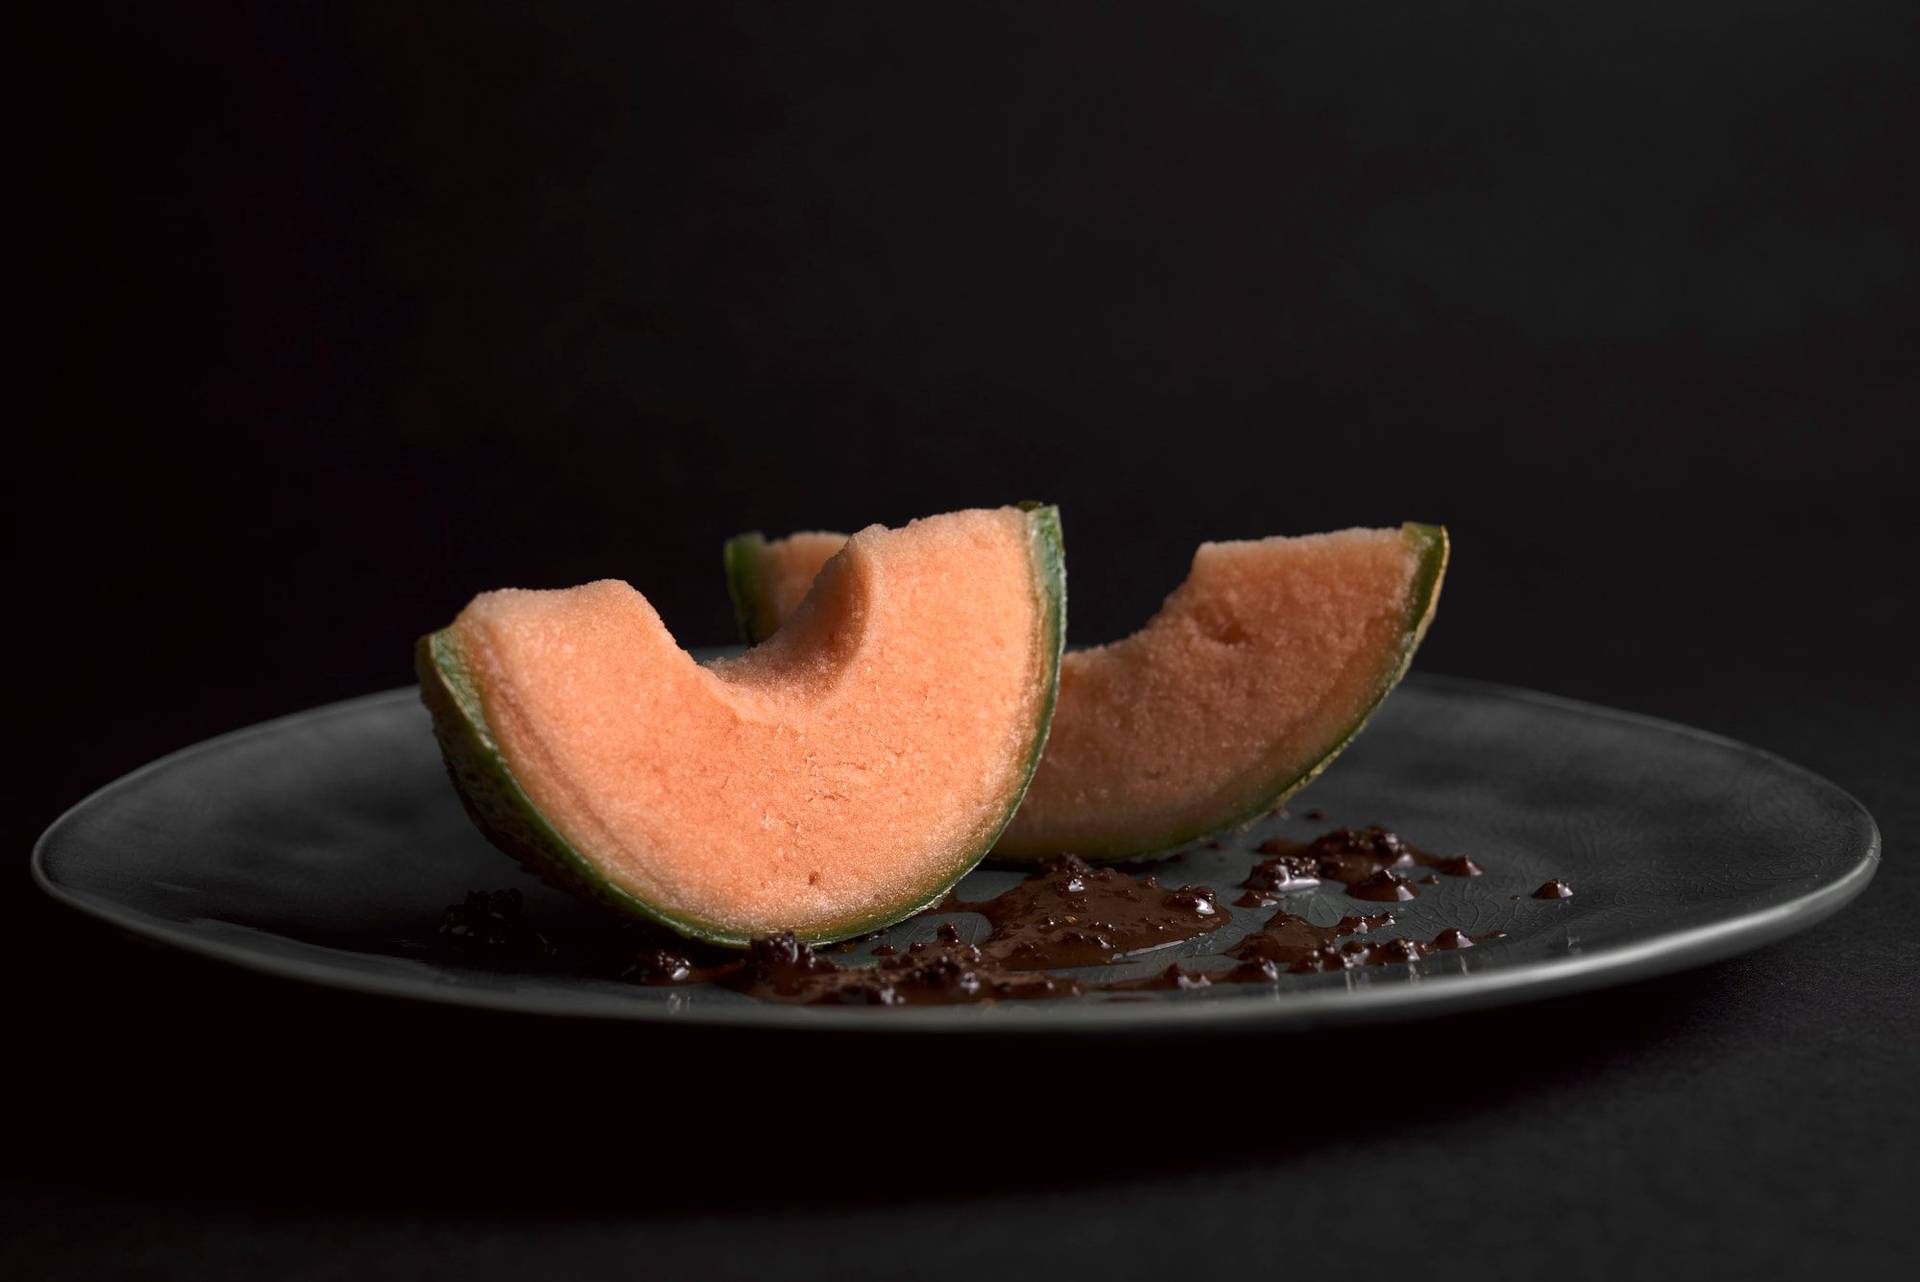 cantaloupe melon sorbet with spicy chocolate pesto on a gray plate with black background